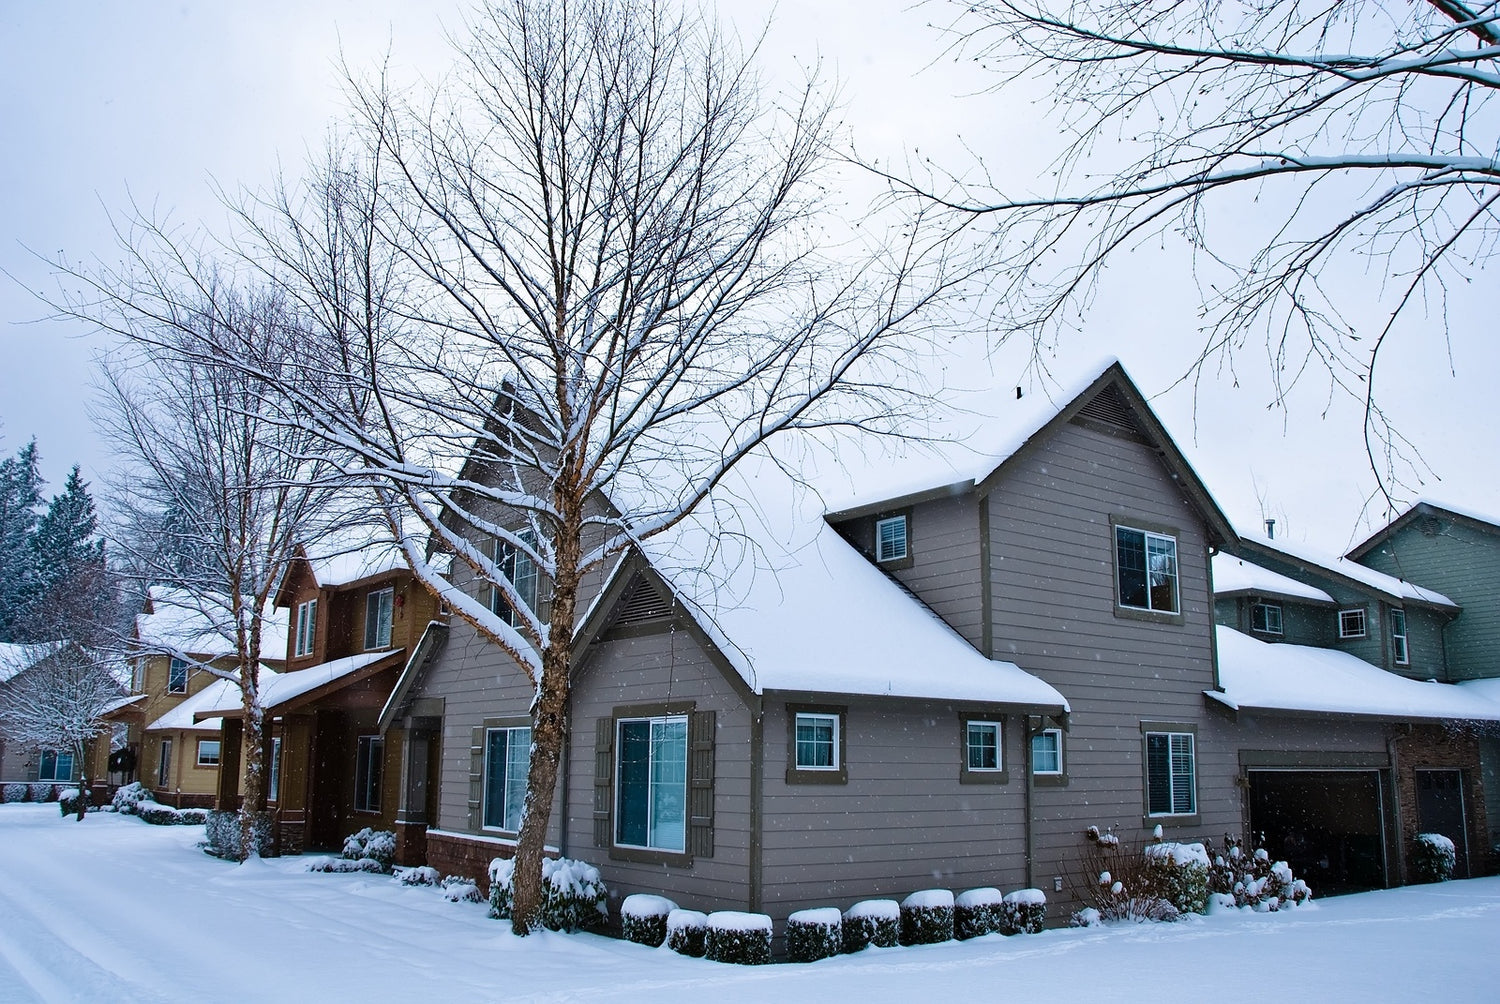 18 Ways to Save Electricity (or Go Green) this Winter Without Sacrificing Warmth